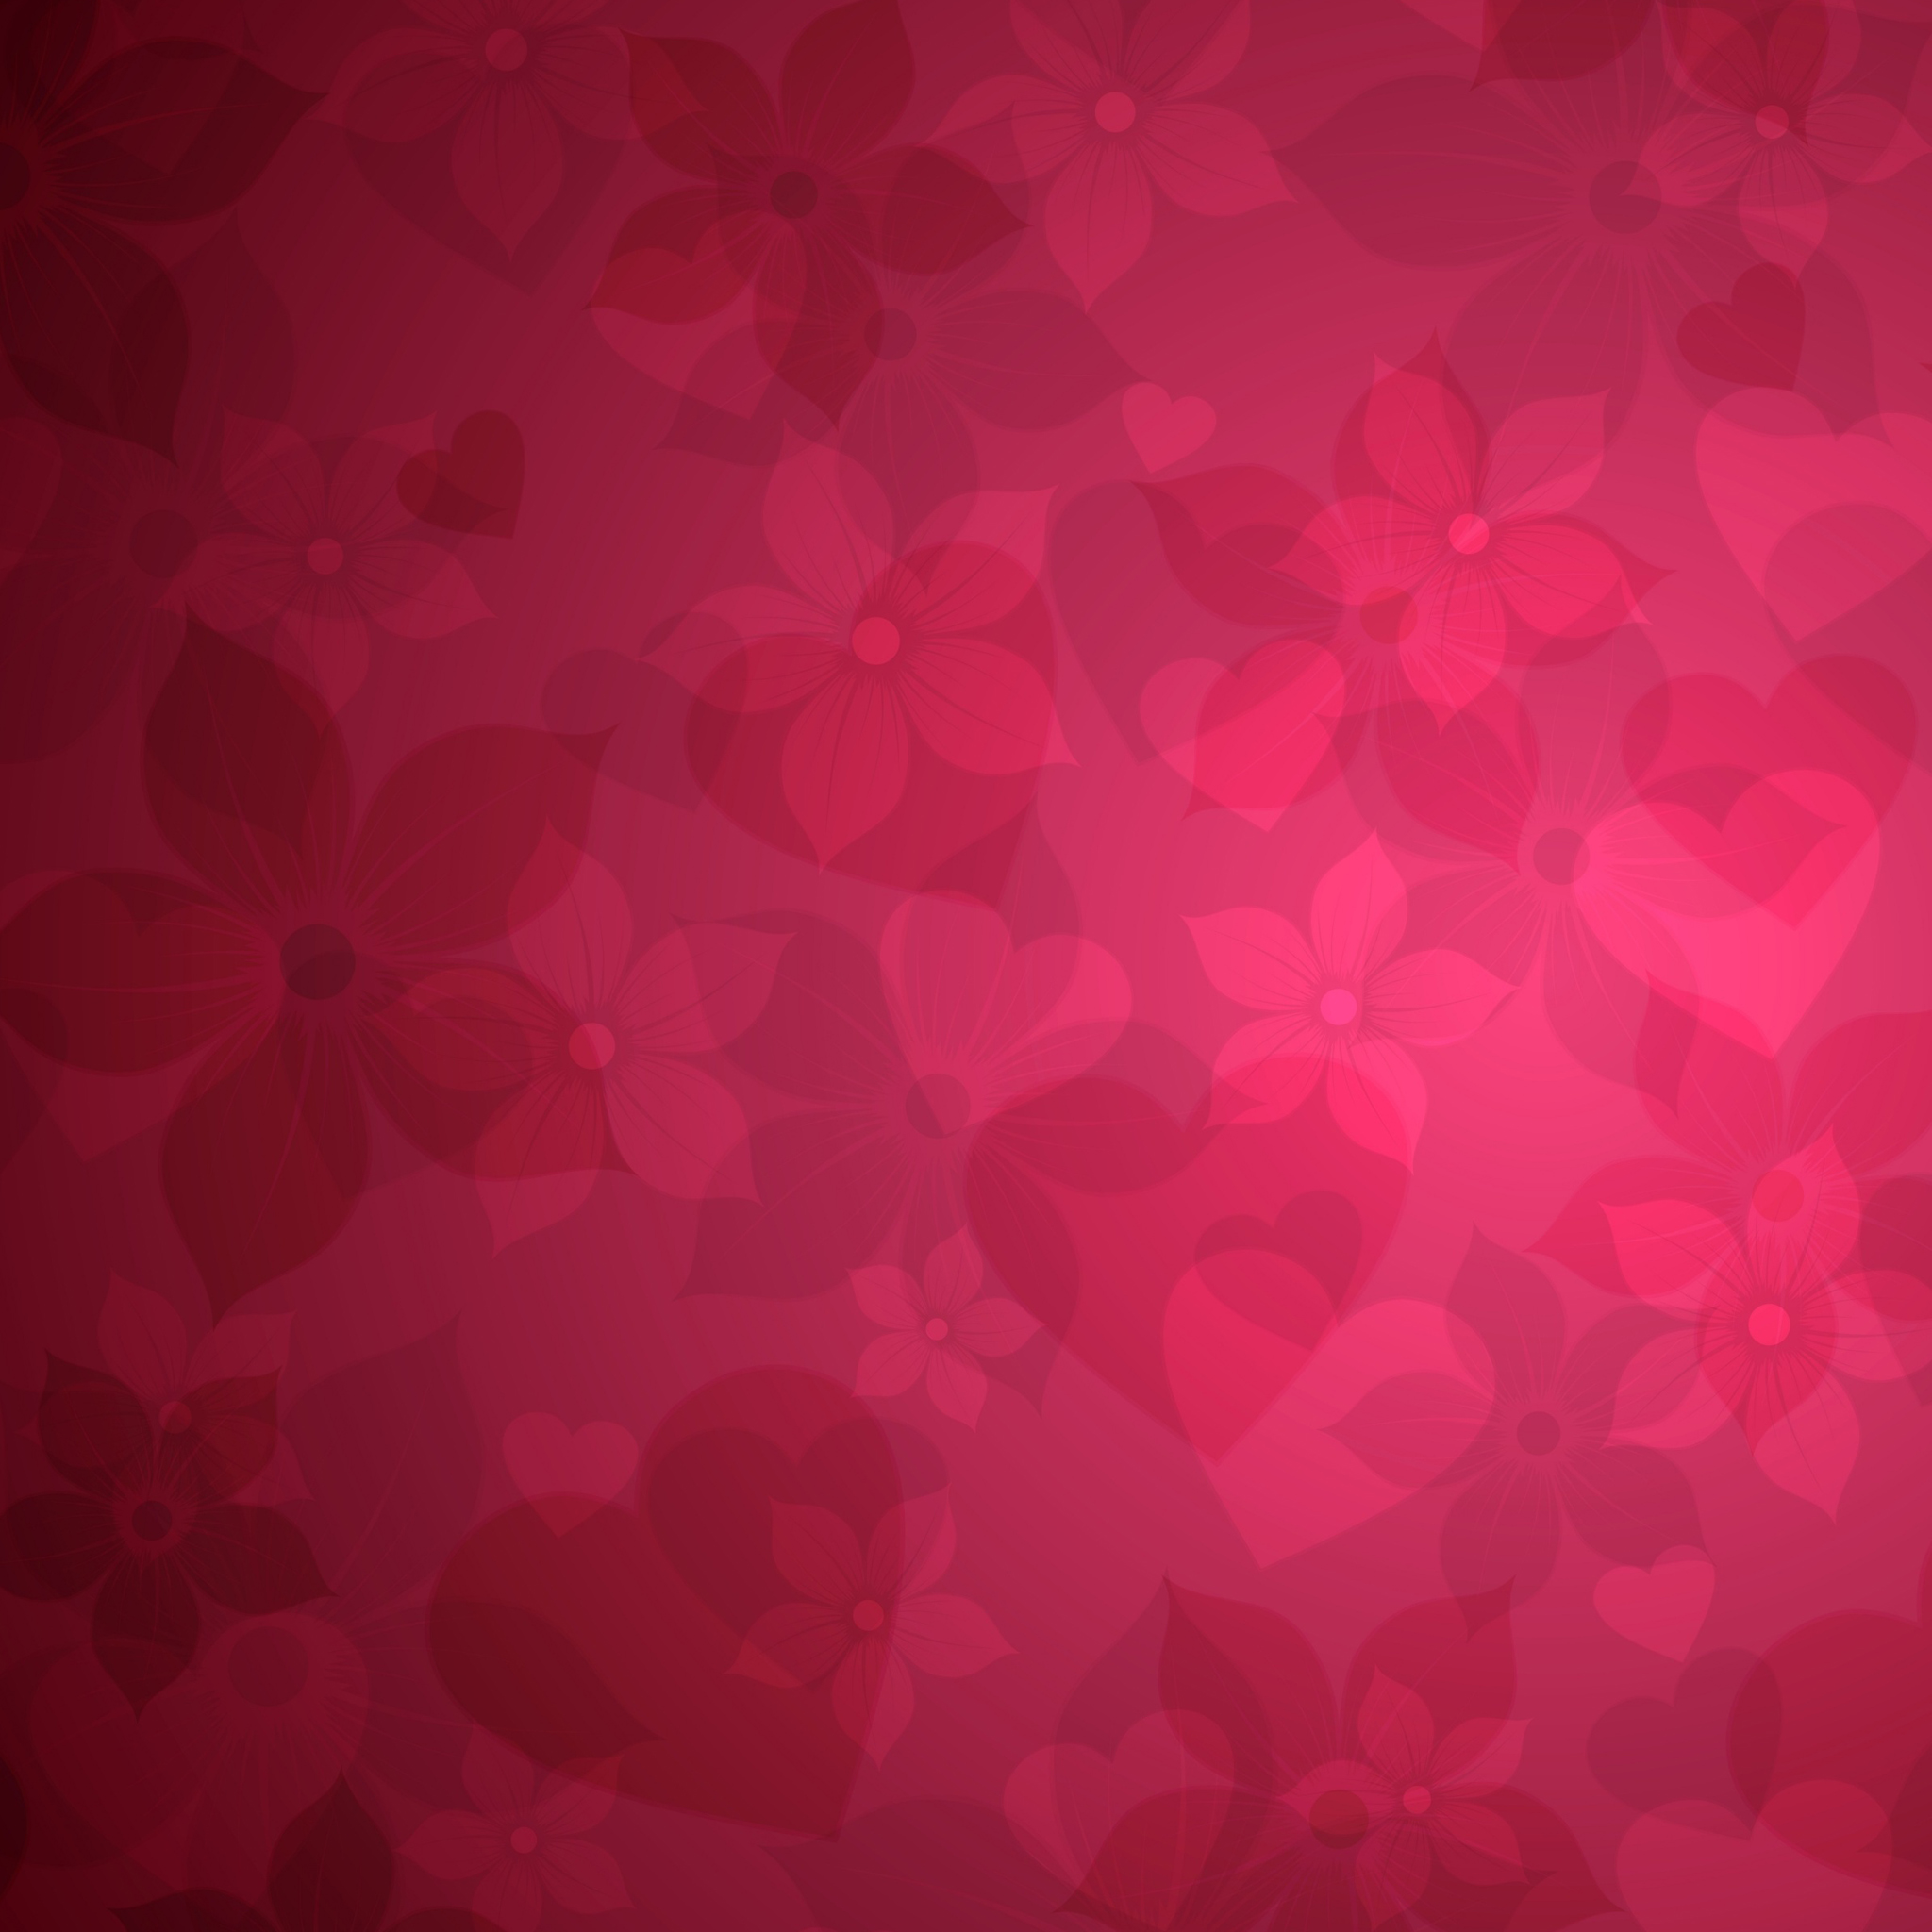 Ipad Air Wallpapers - Red Floral Texture Background - HD Wallpaper 